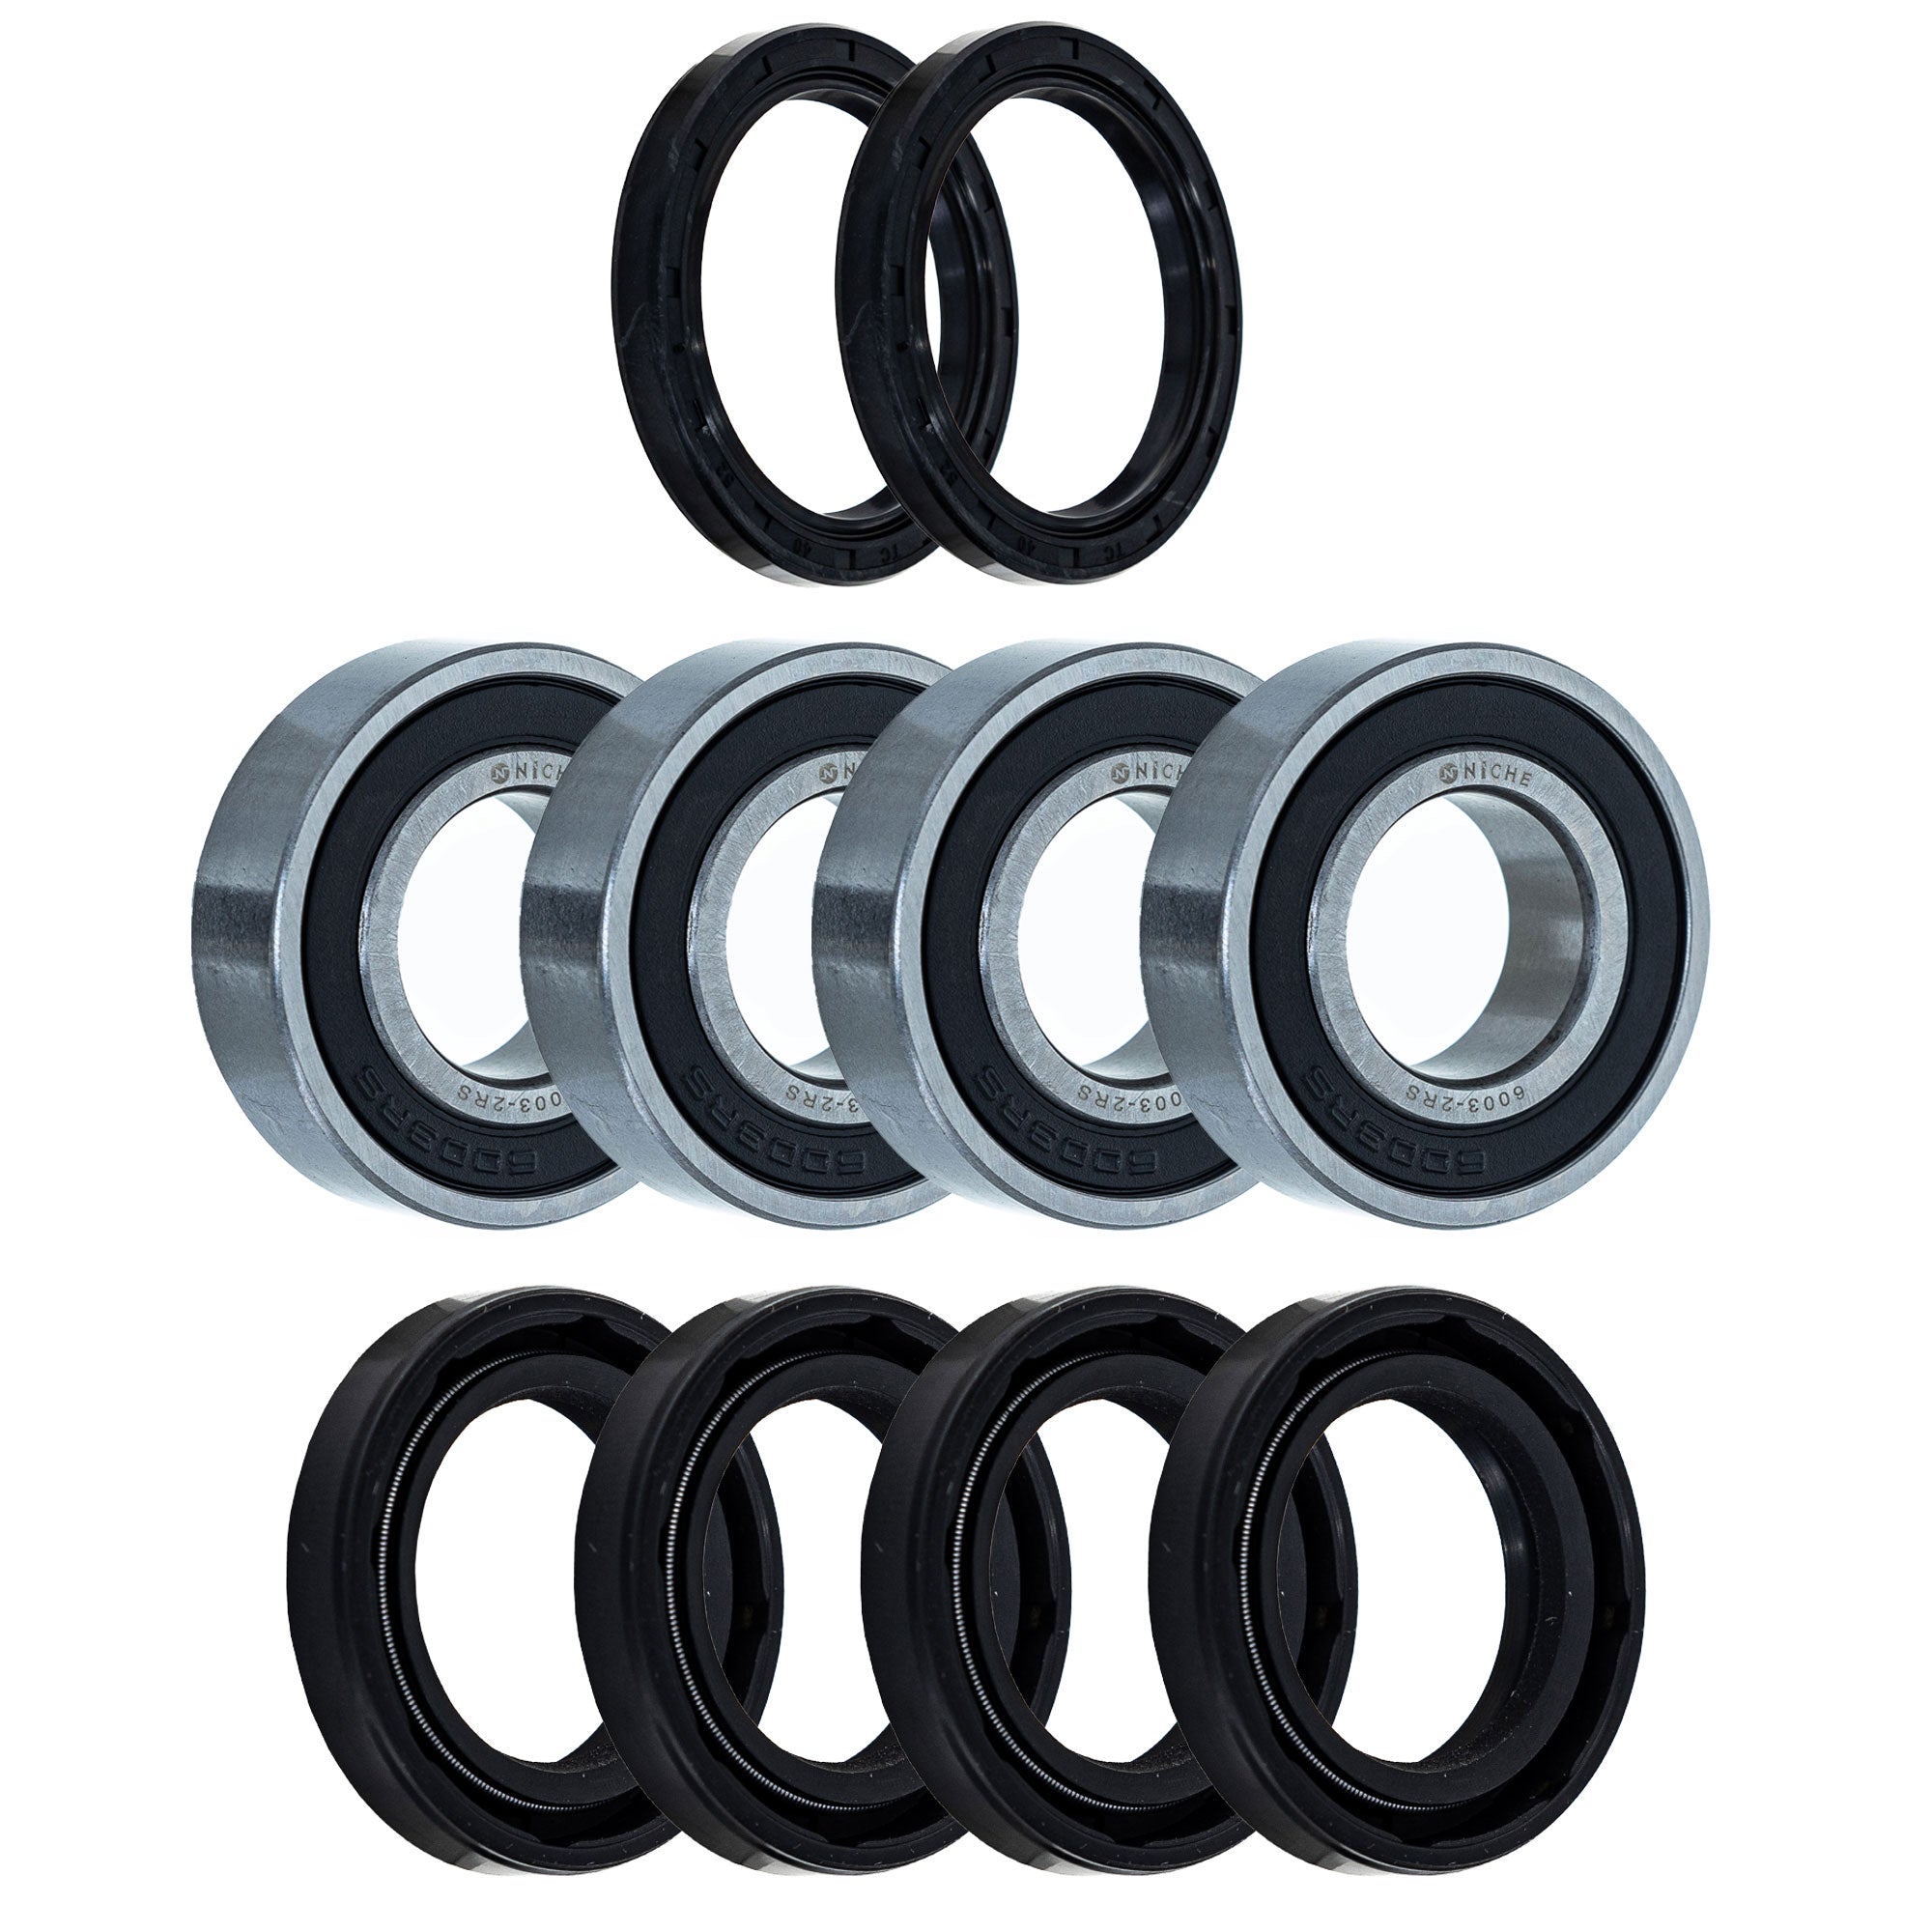 Wheel Bearing Seal Kit for zOTHER TRX90 SporTrax Raptor Grizzly NICHE MK1008250